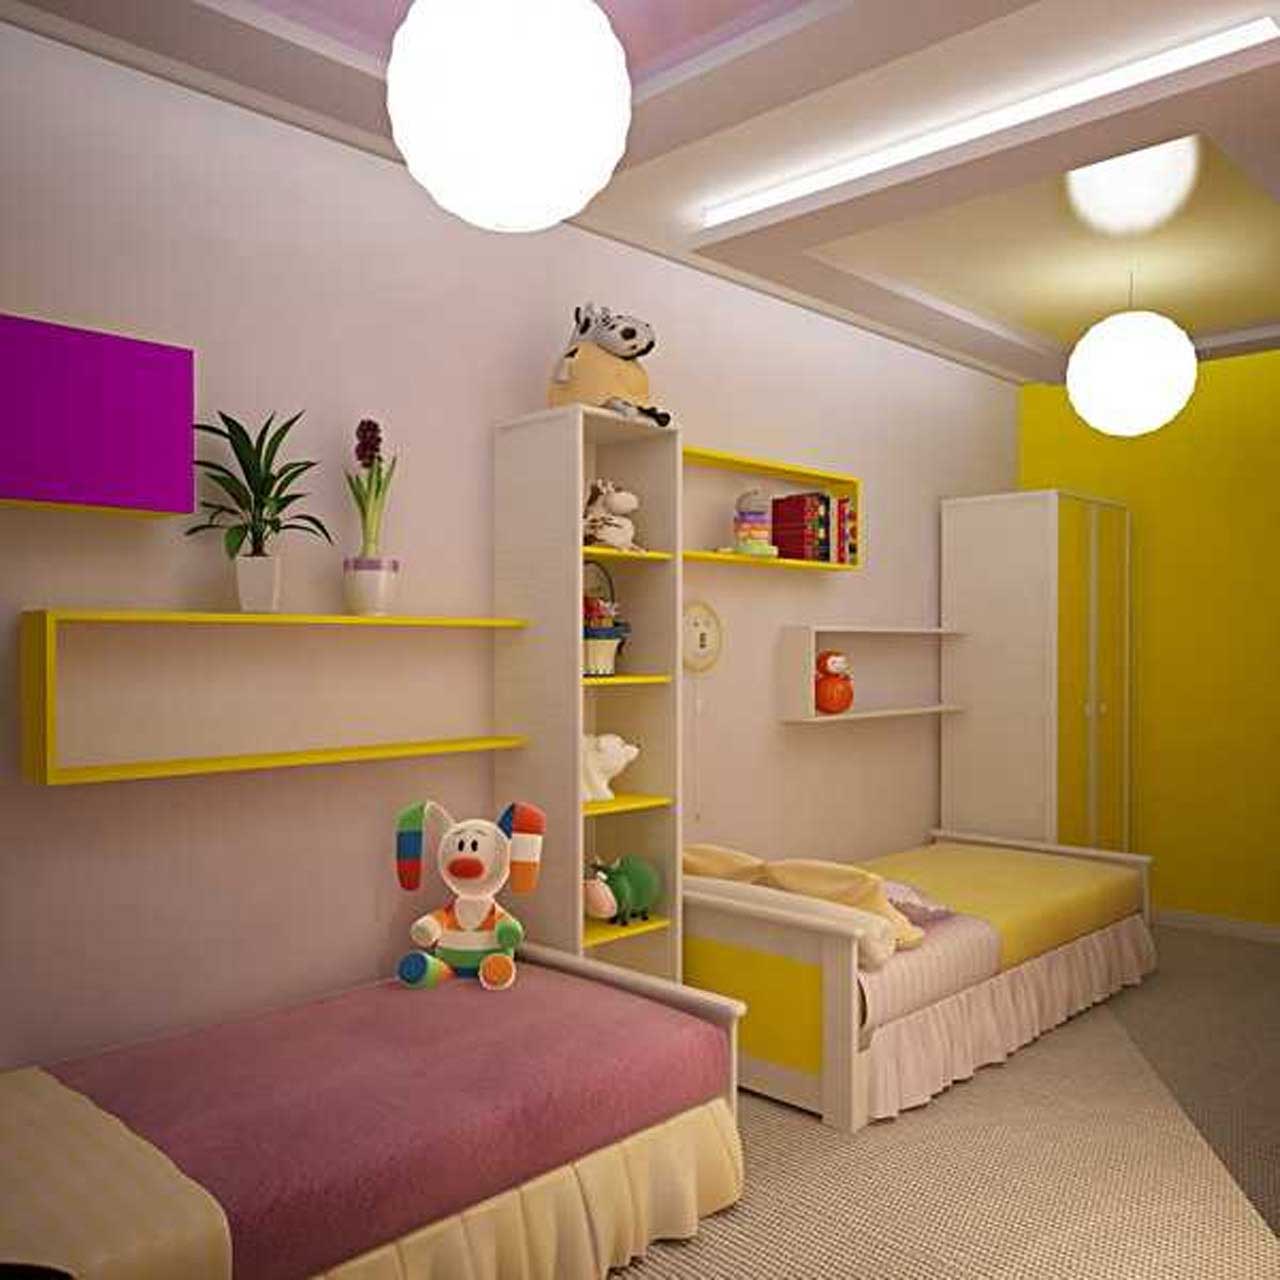 Room Decorating 2 Kids Room Decorating Ideas For 2 Bedroom Furniture With Simple Wooden Dollhouse Shelf Also Funny Animals Doll Kids Room Ideas Plus Trendy Brown Striped Carpet Kids Room Design Ideas Decoration Kids Desire And Kids Room Decor